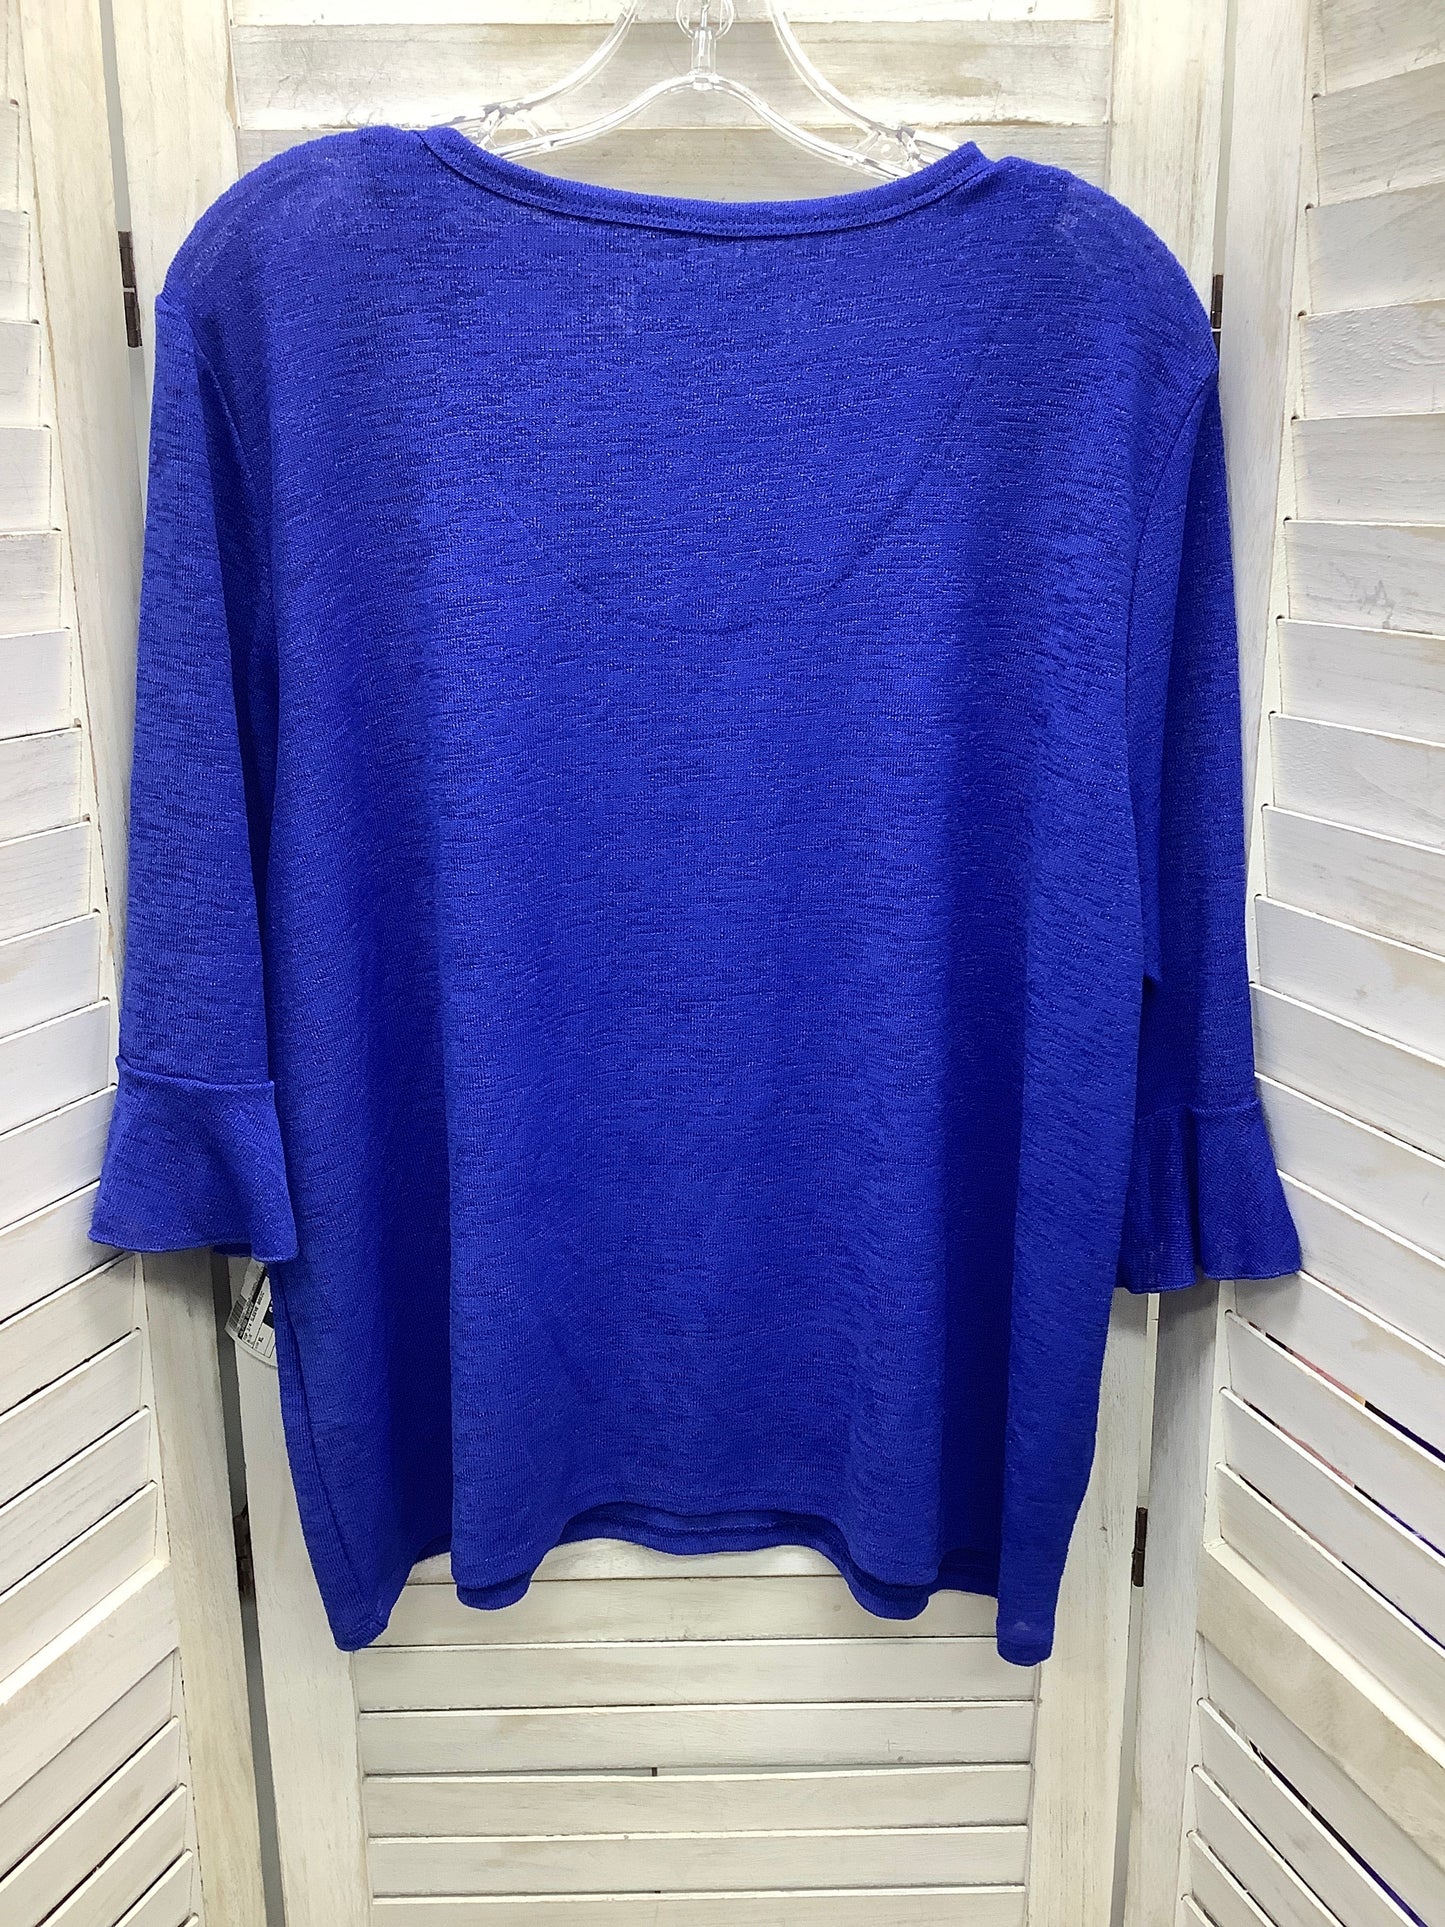 Blue Top 3/4 Sleeve Basic Alfred Dunner, Size Xl